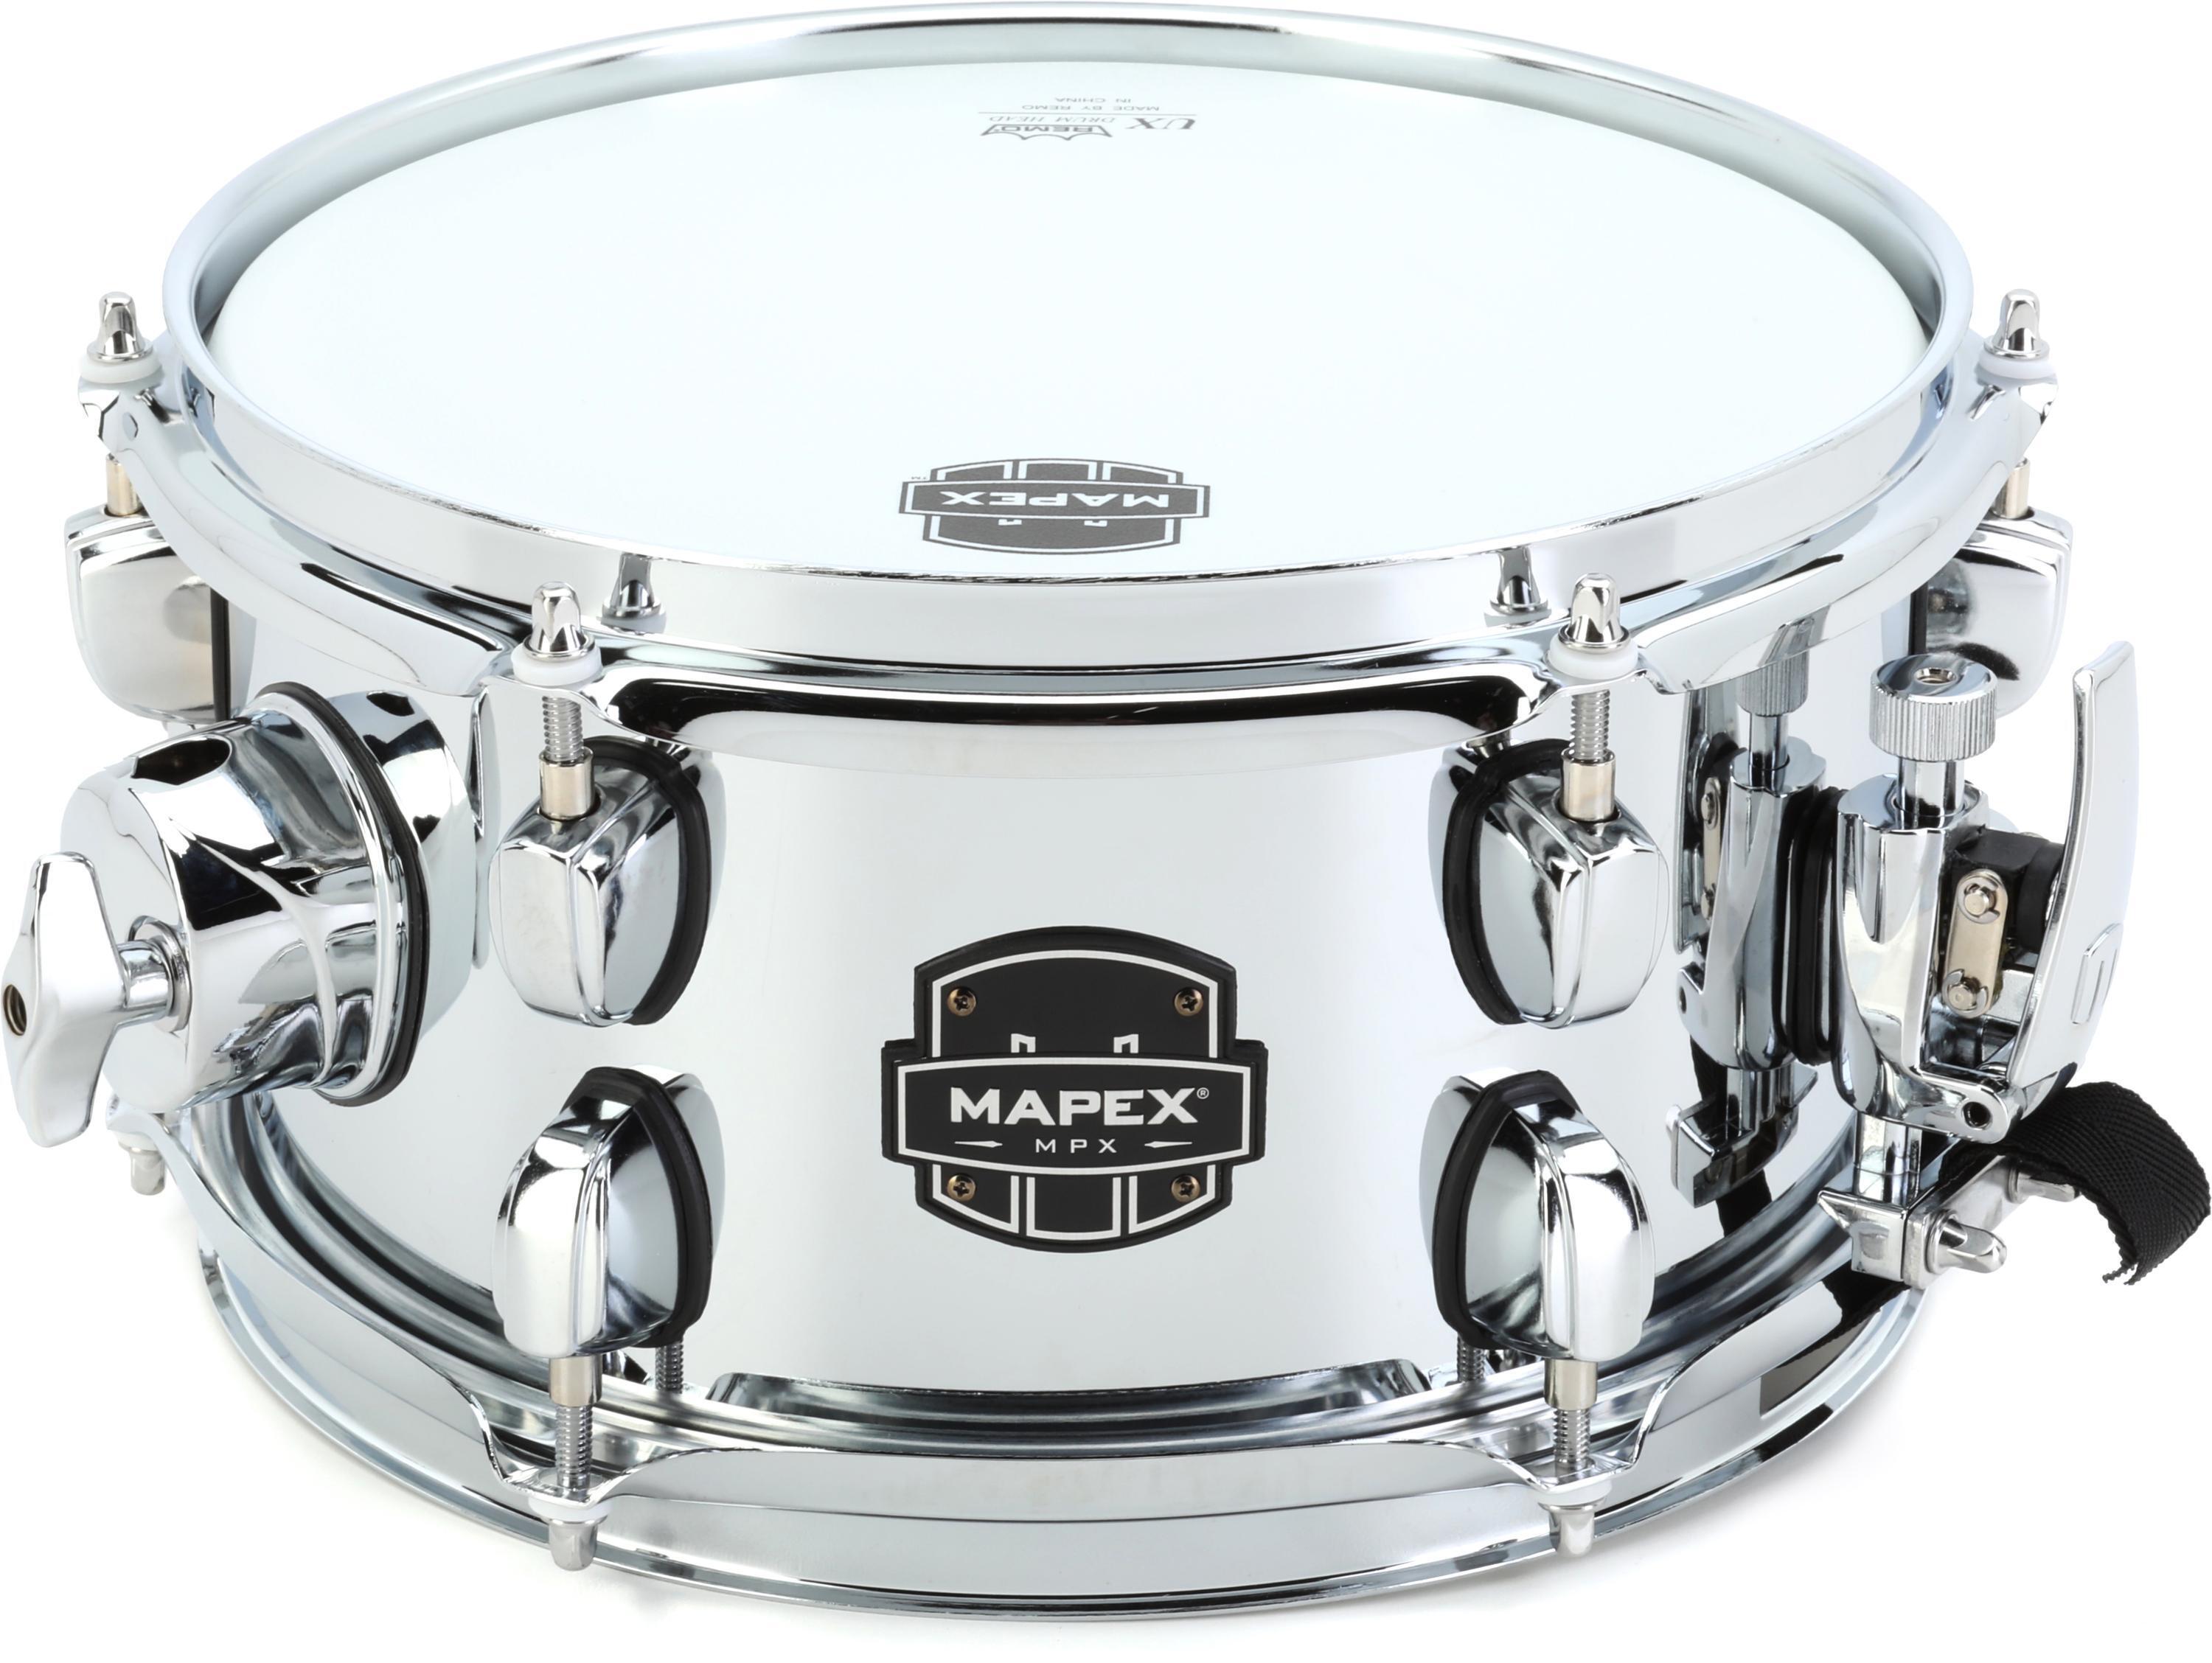 Mapex MPX Steel Side Snare Drum - 5.5 x 10-inch - Polished